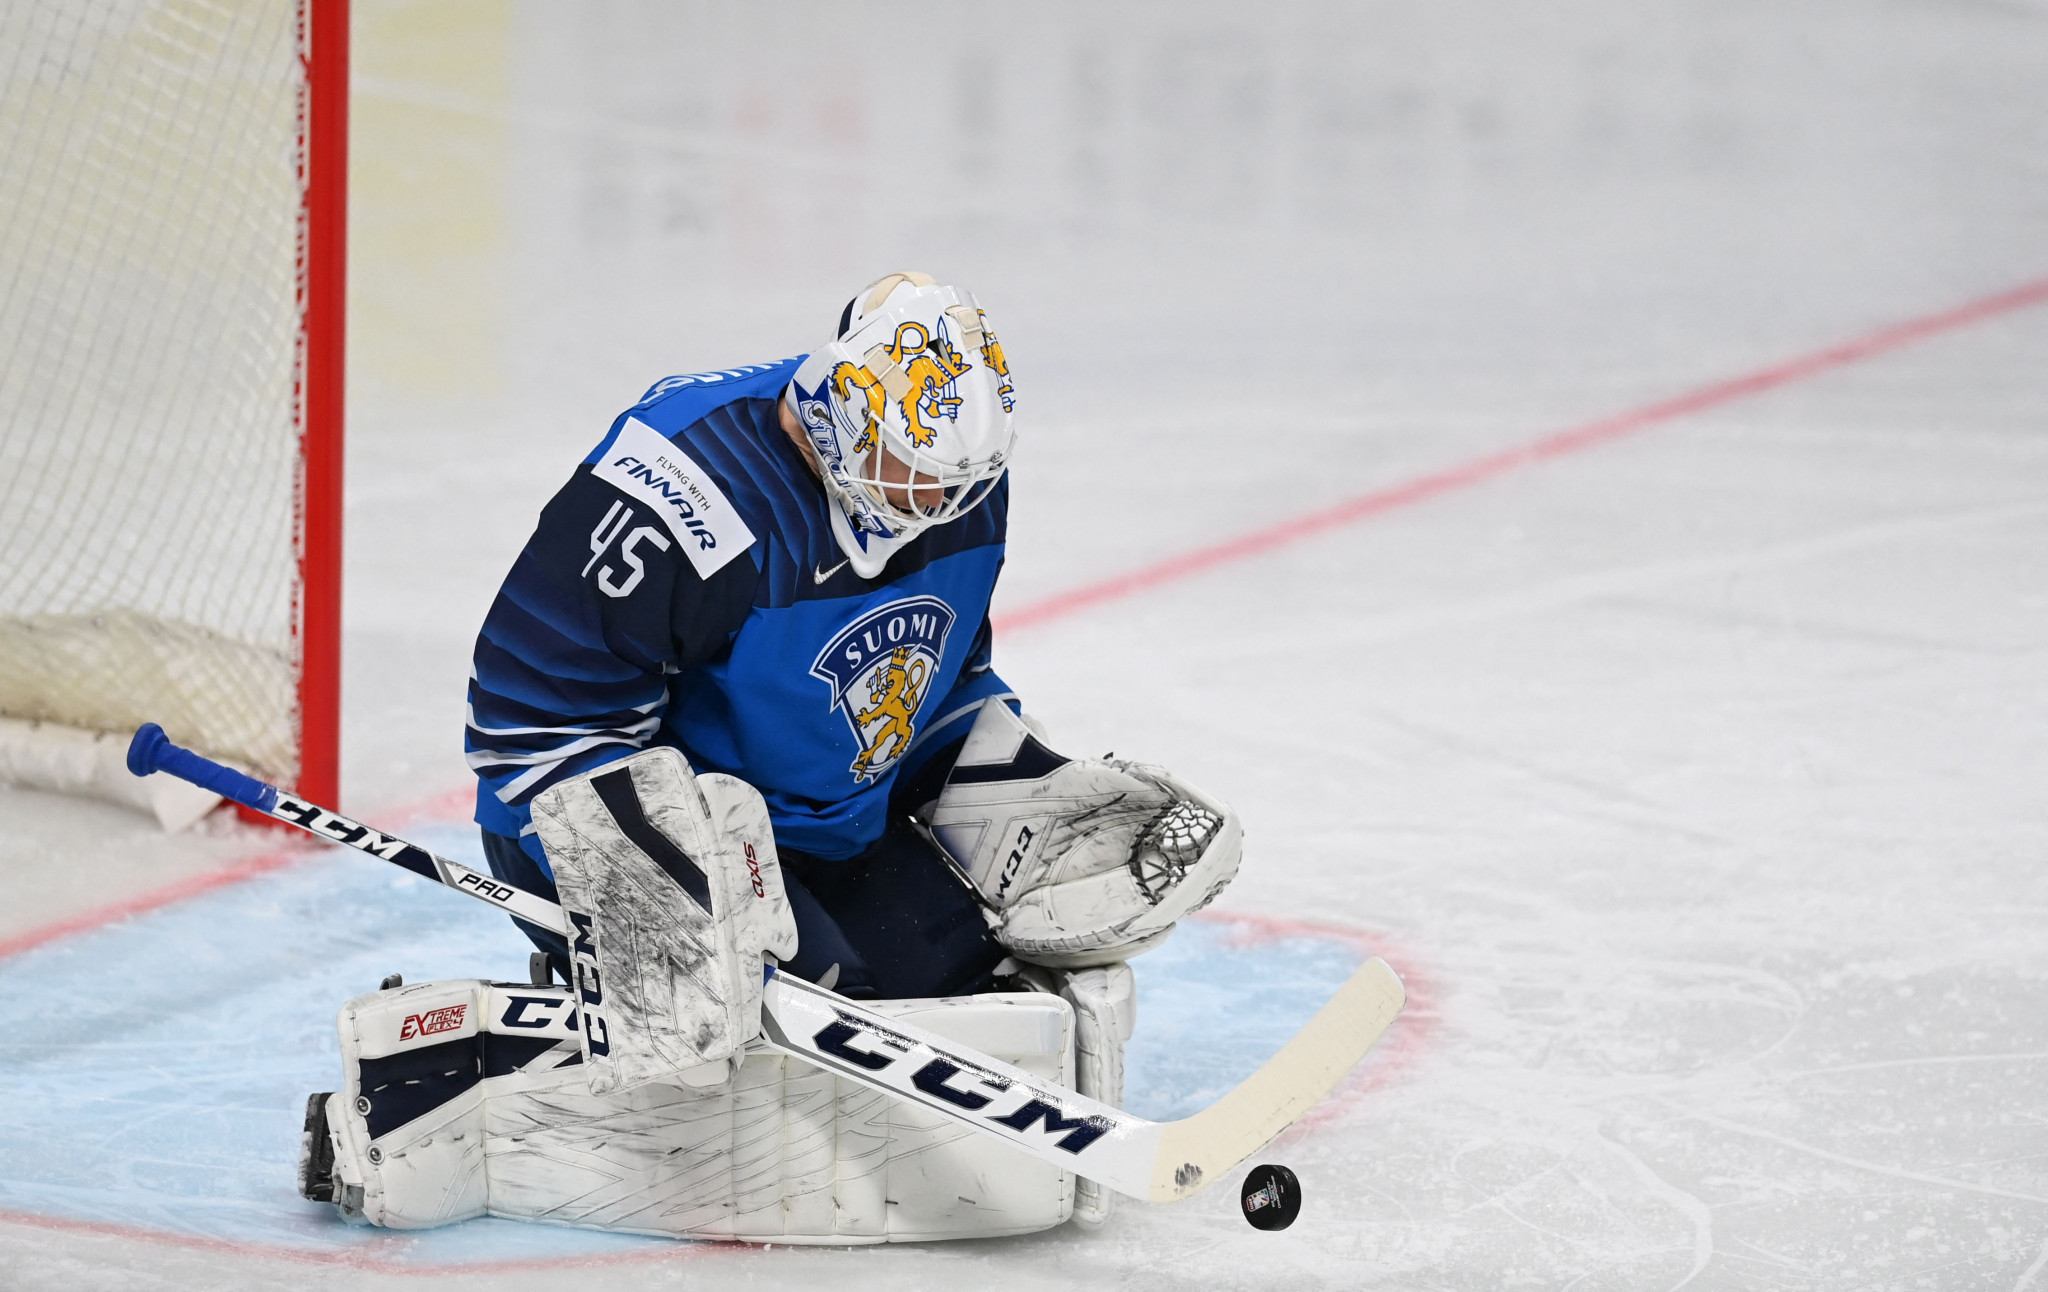 Defending champions Finland suffered a shock defeat to Kazakhstan in Riga ©Getty Images